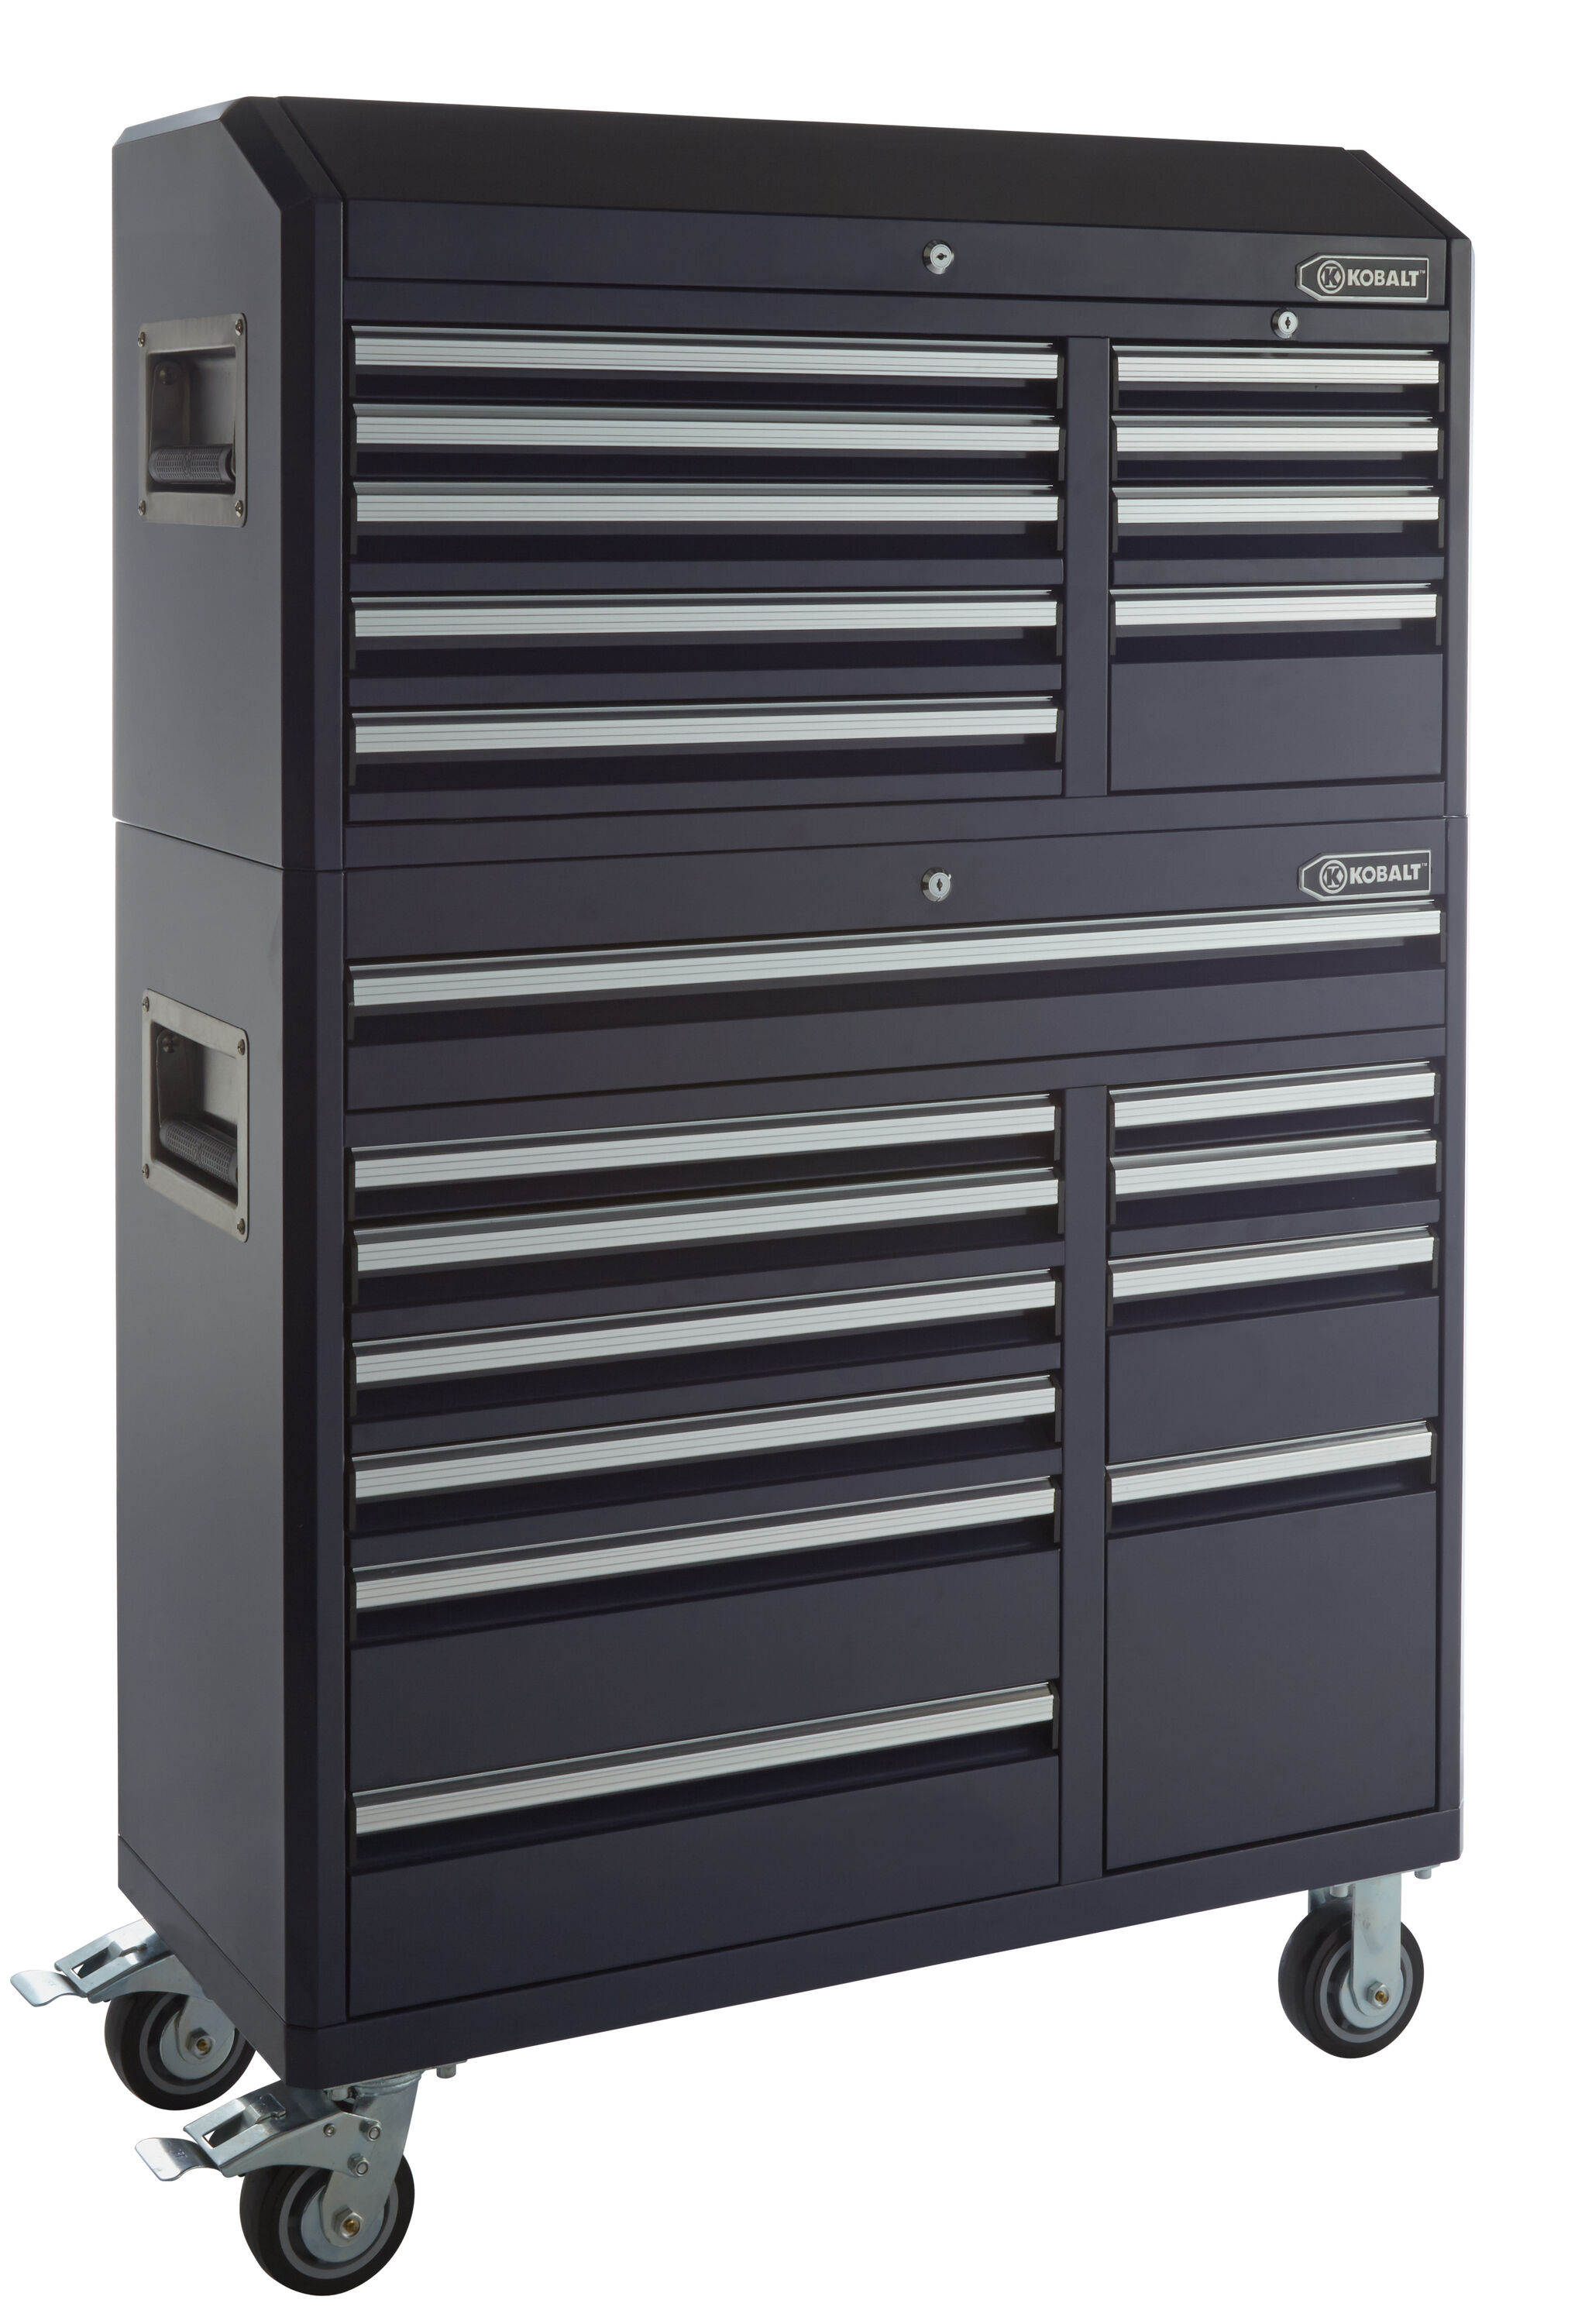 Kobalt 41-in W x 22.5-in H 9-Drawer Steel Tool Chest (Blue) at